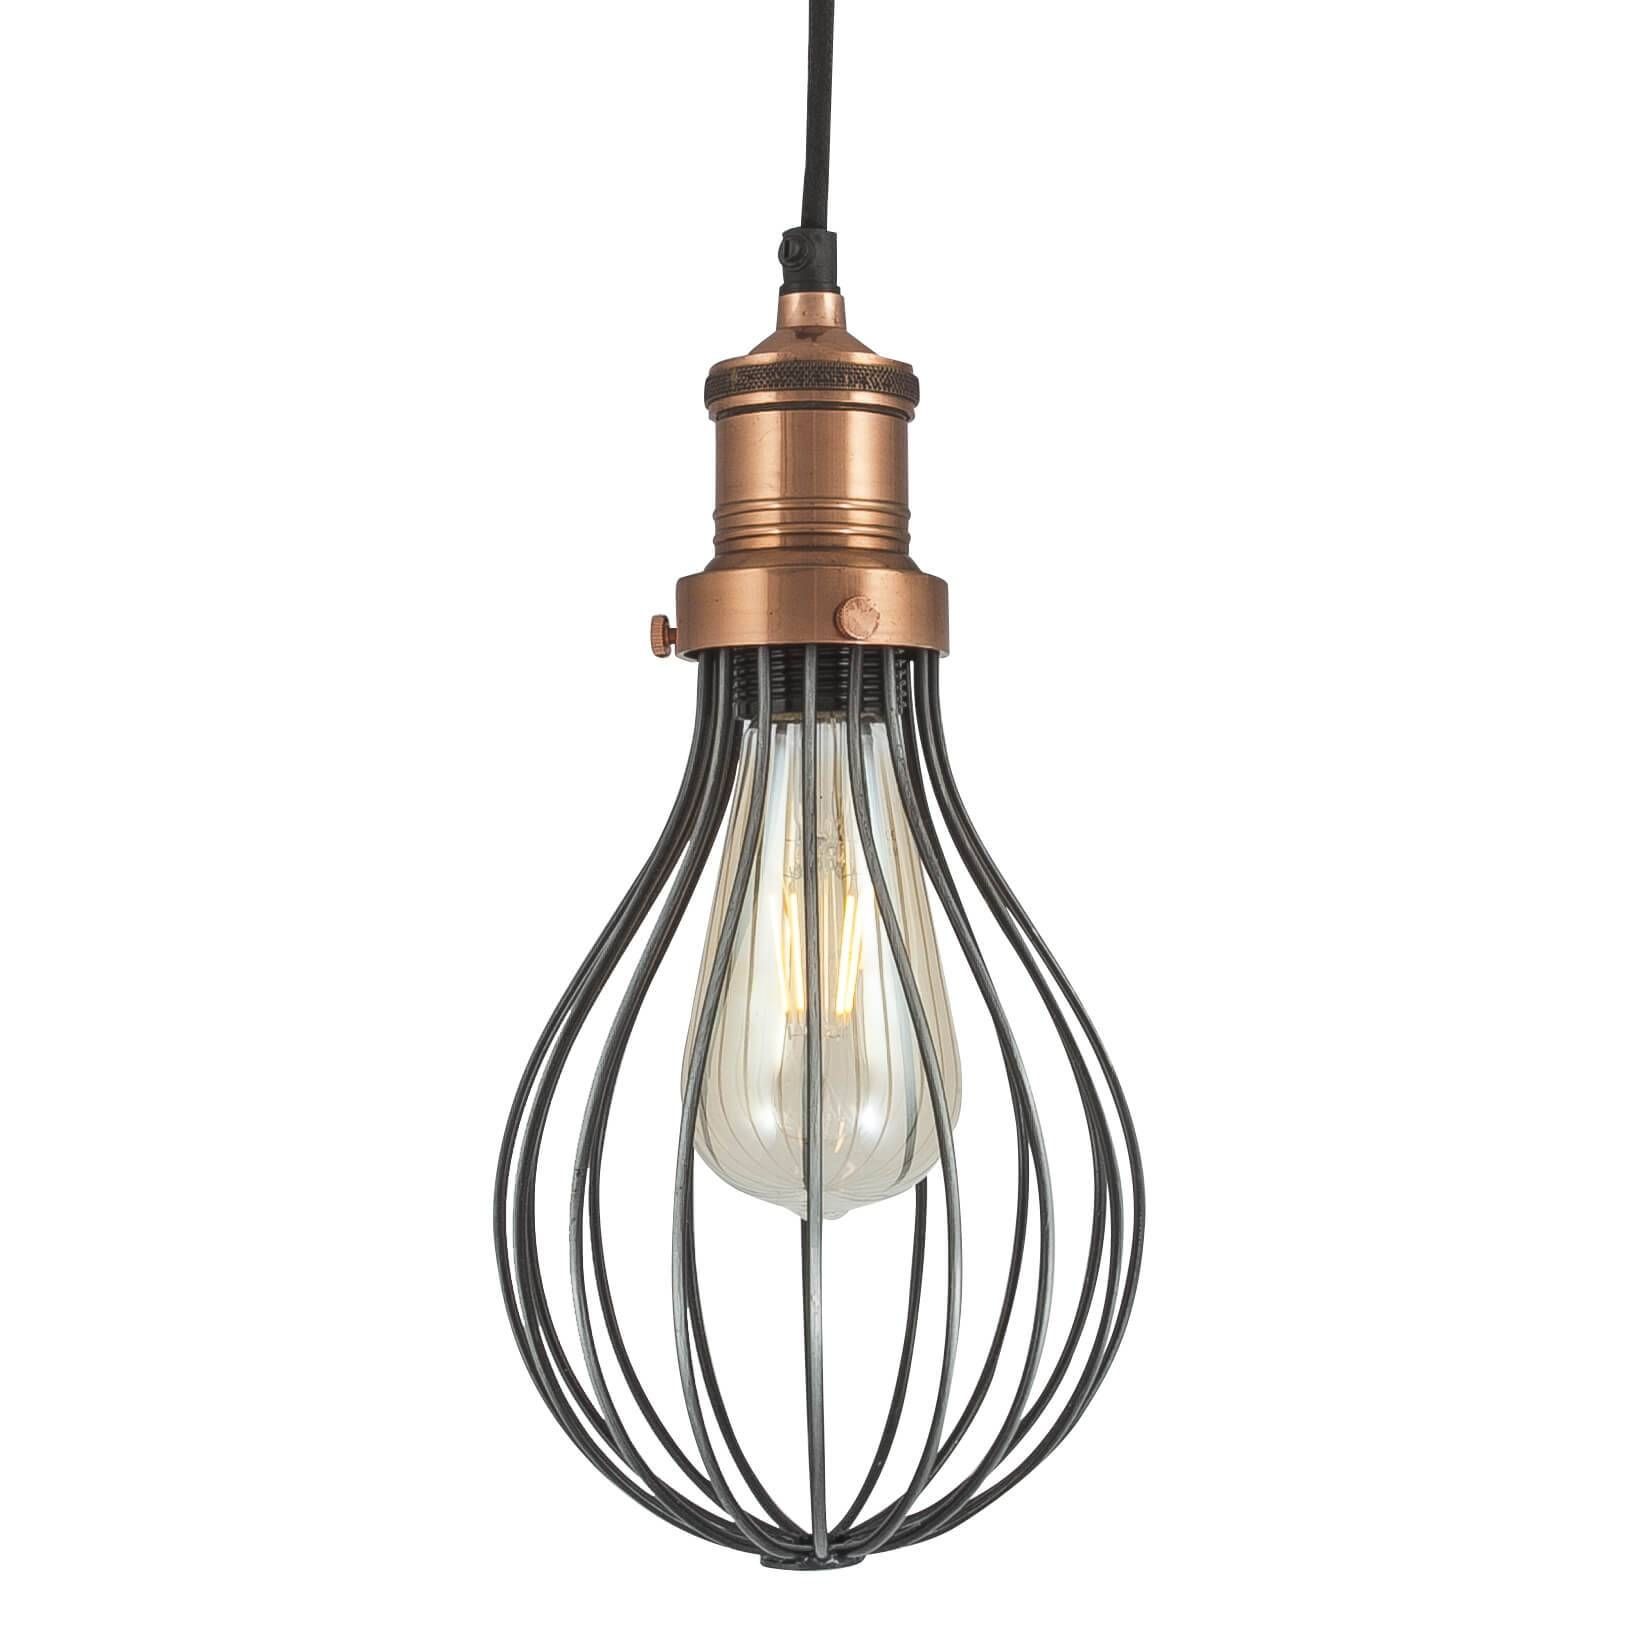 Unique Cage Pendant Light 49 For Pull Down Ceiling Light With Cage In Pull Down Pendant Lighting (View 13 of 15)